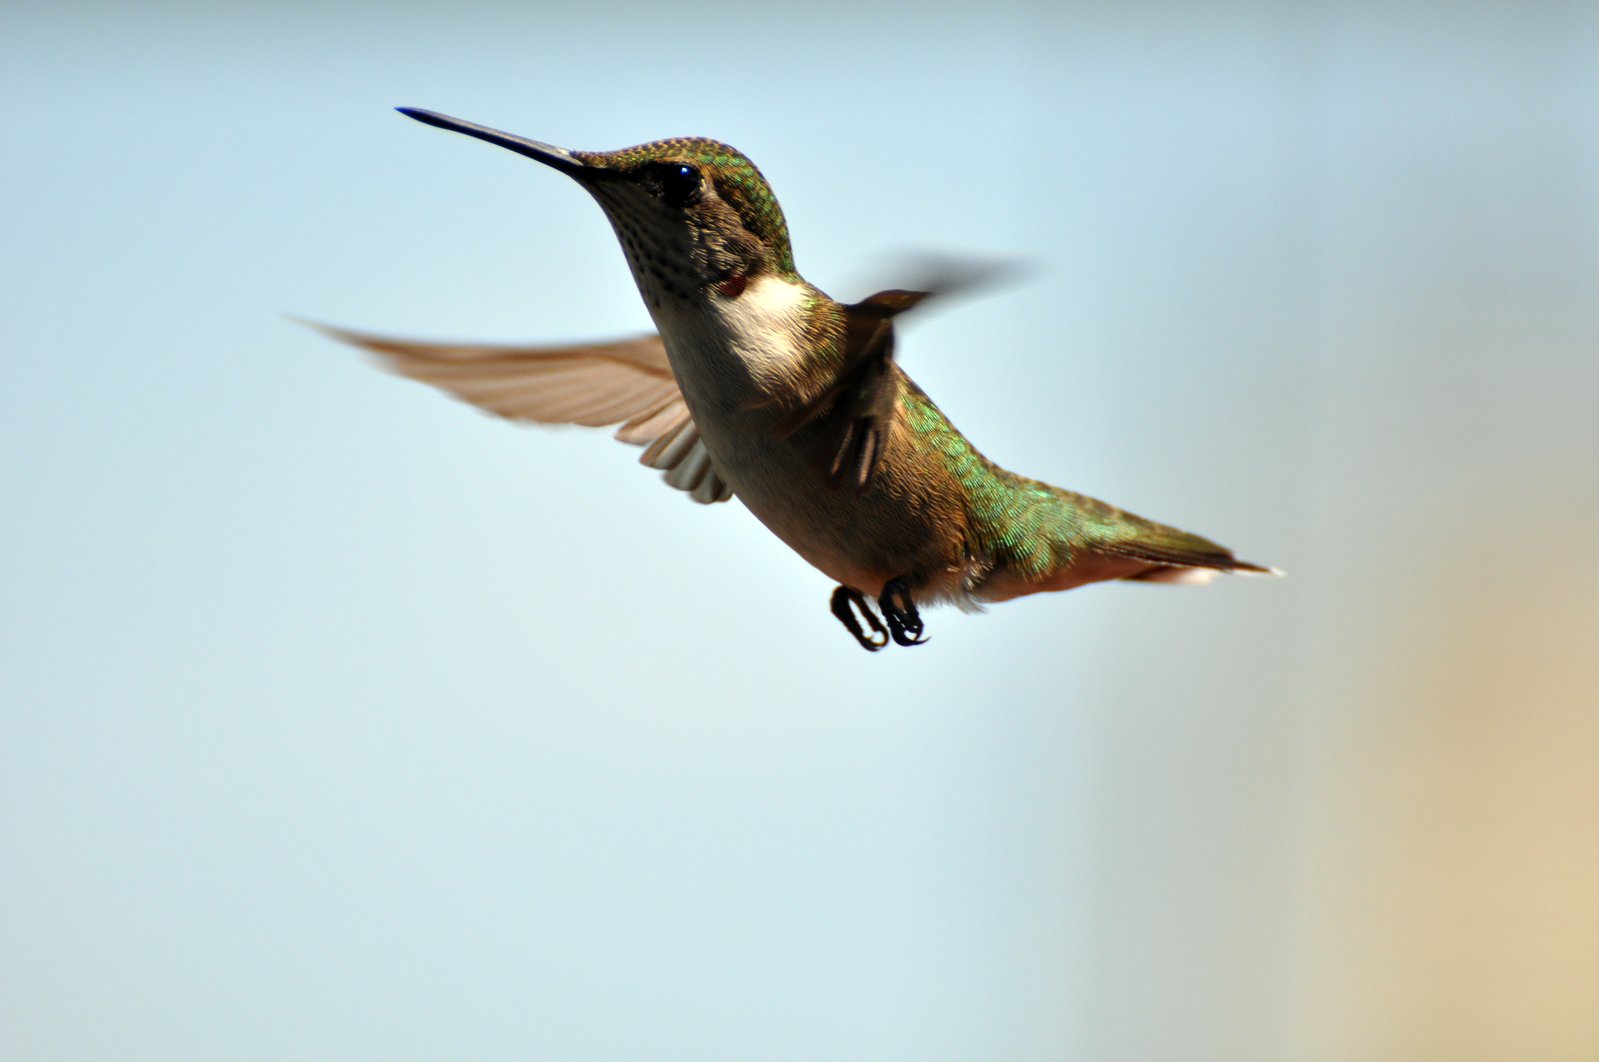 the hummingbird is flying high in the sky